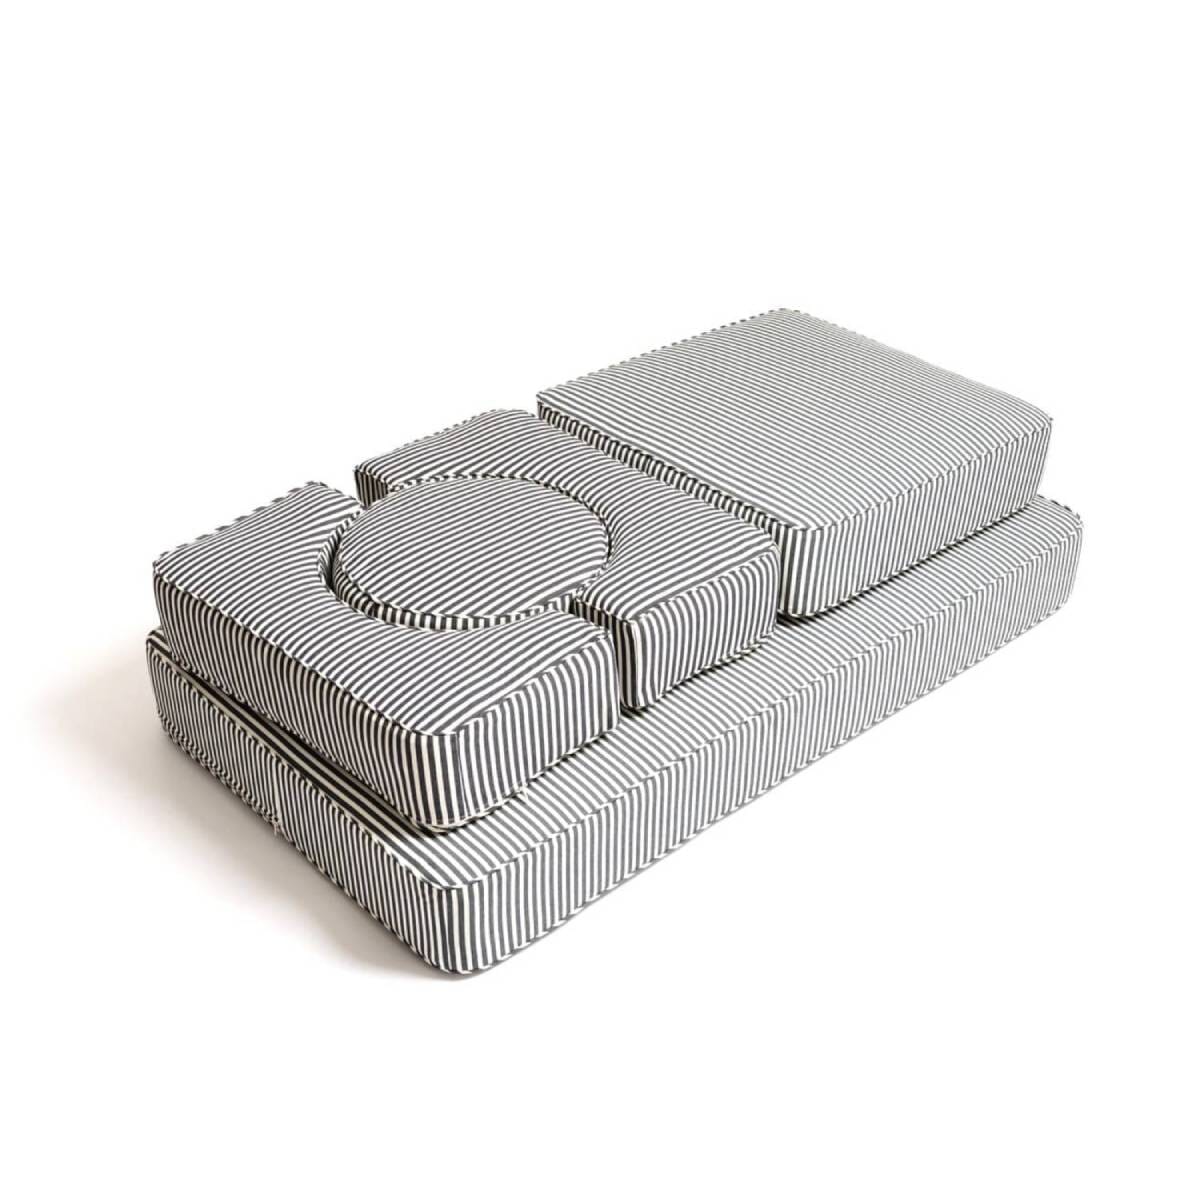 studio image of stacked up modular pillow stack